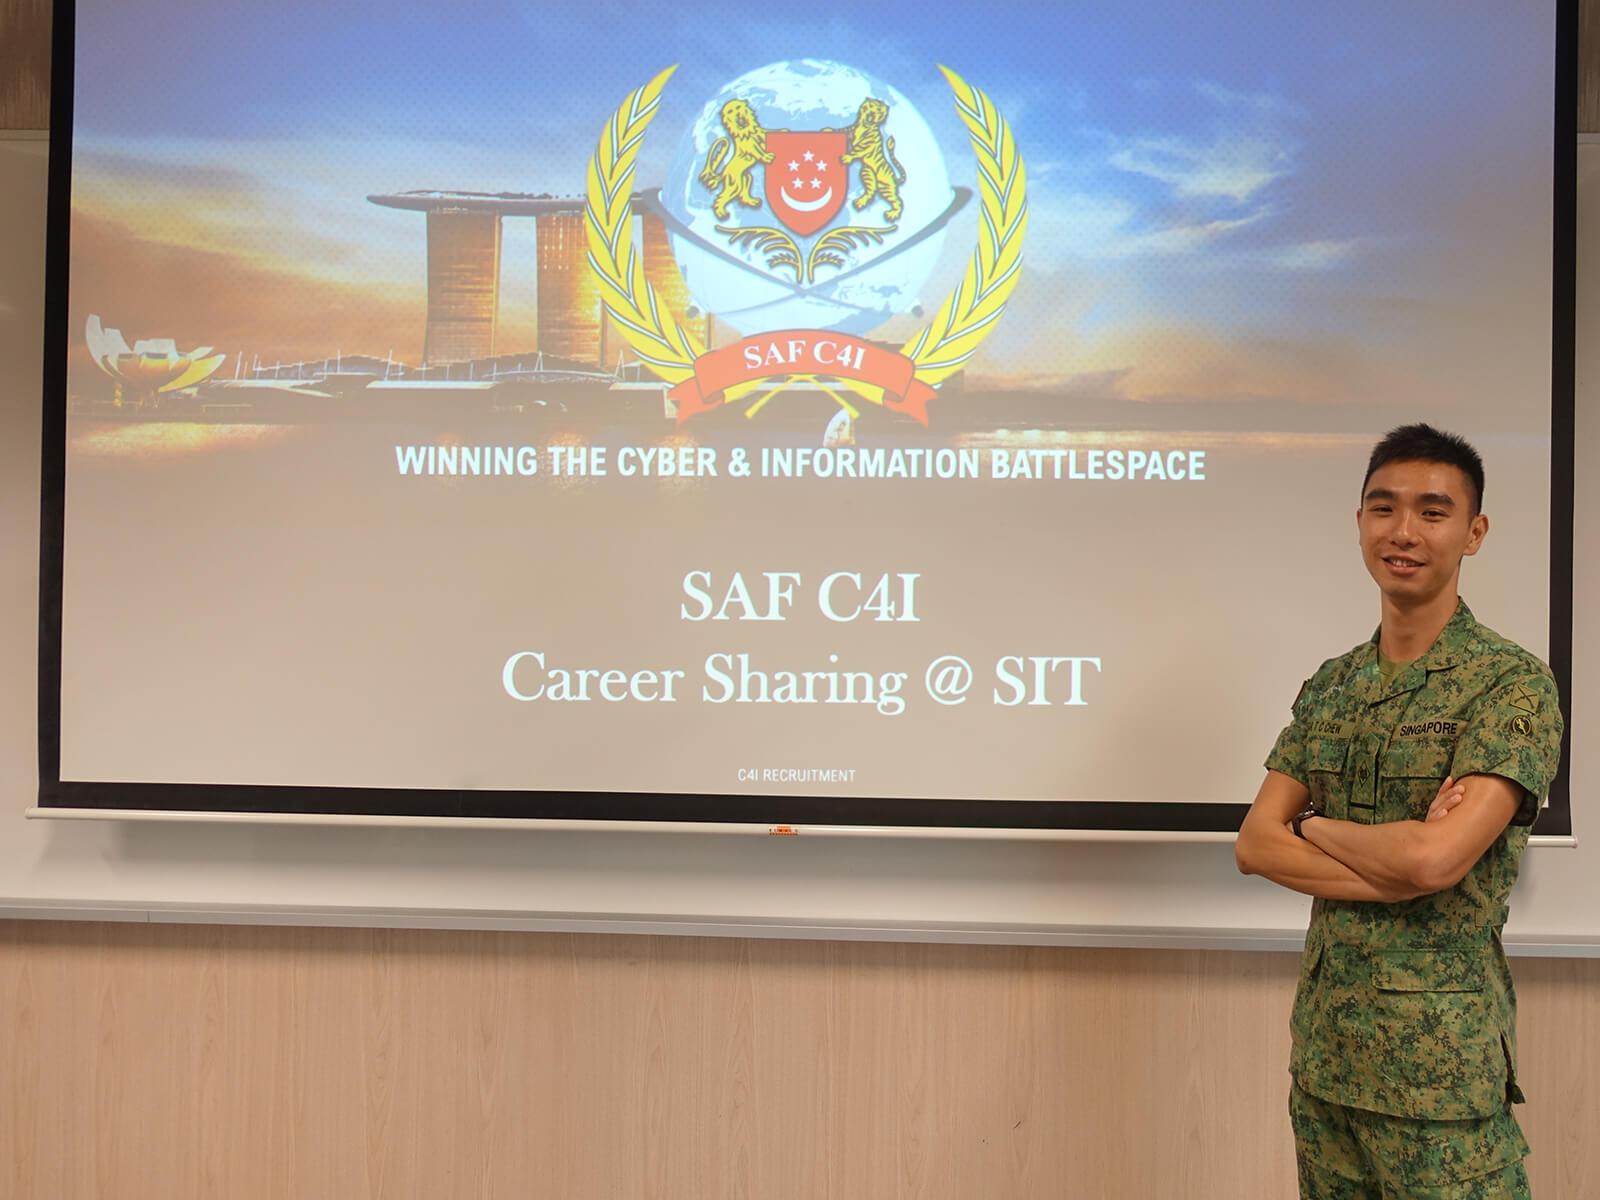 Chew Tee Chin stands in front of a projector screen with the SAF C4I logo.